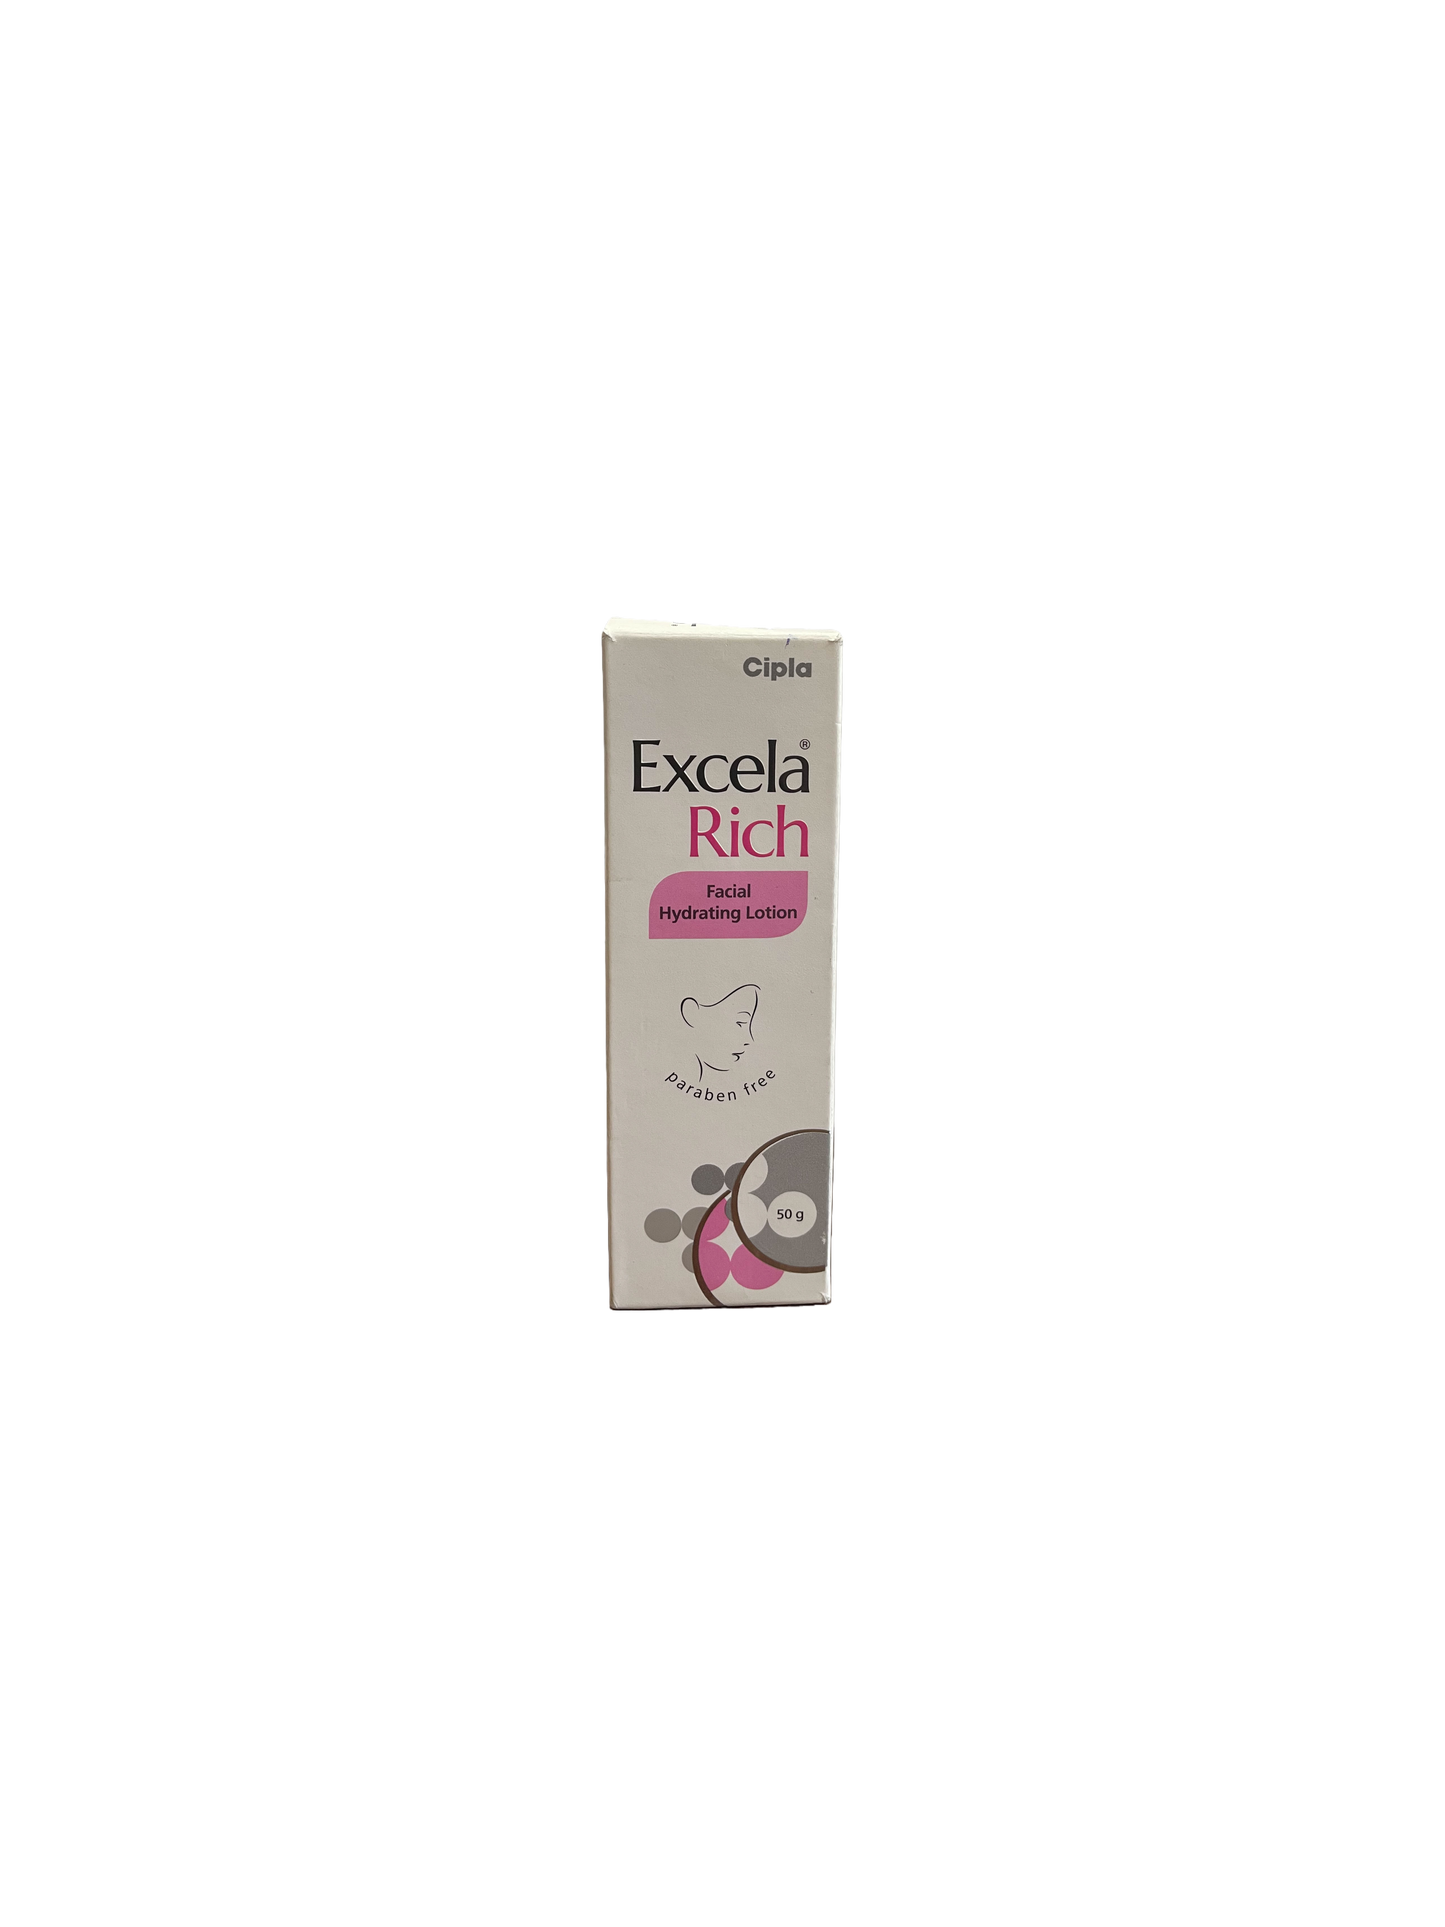 Excela Rich Hydrating Lotion